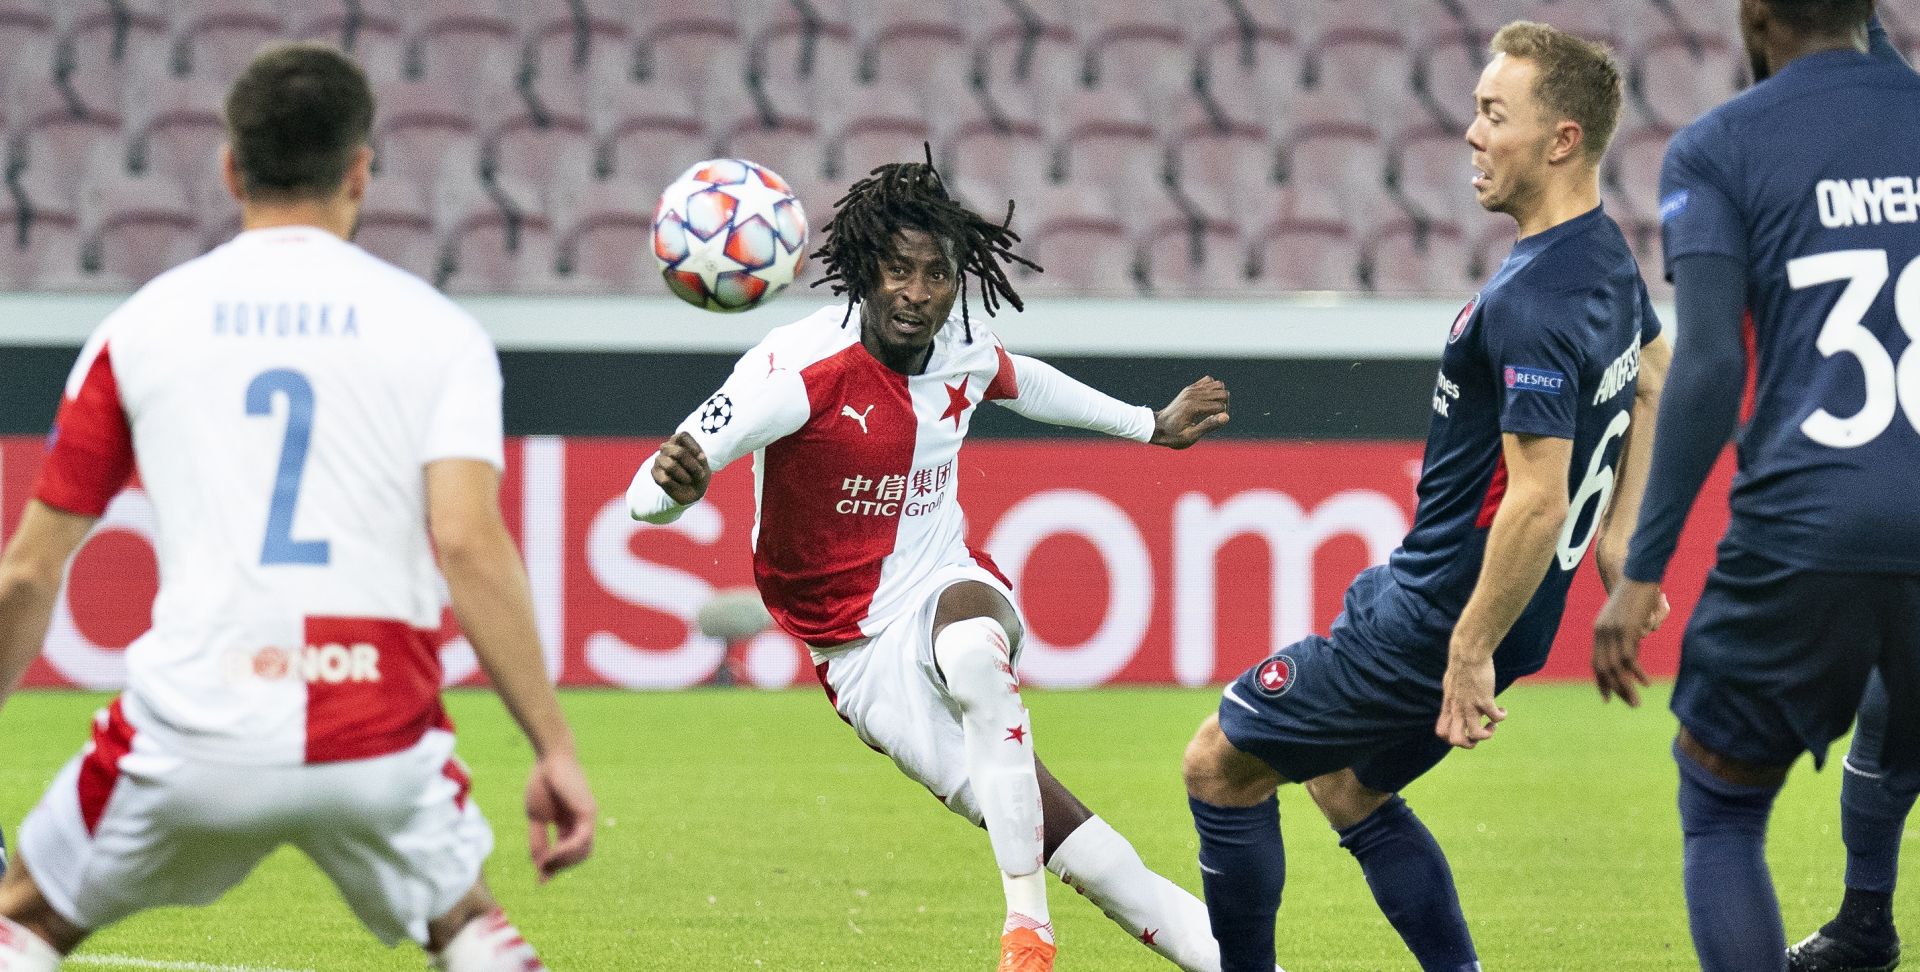 epa08709898 Slavia Prague's Peter Olayinka (C) scores the 1-0 goal during the UEFA Champions League playoff second leg soccer match between FC Midtjylland and Slavia Prague at MCH Arena in Herning, Denmark, 30 September 2020.  EPA/Henning Bagger  DENMARK OUT